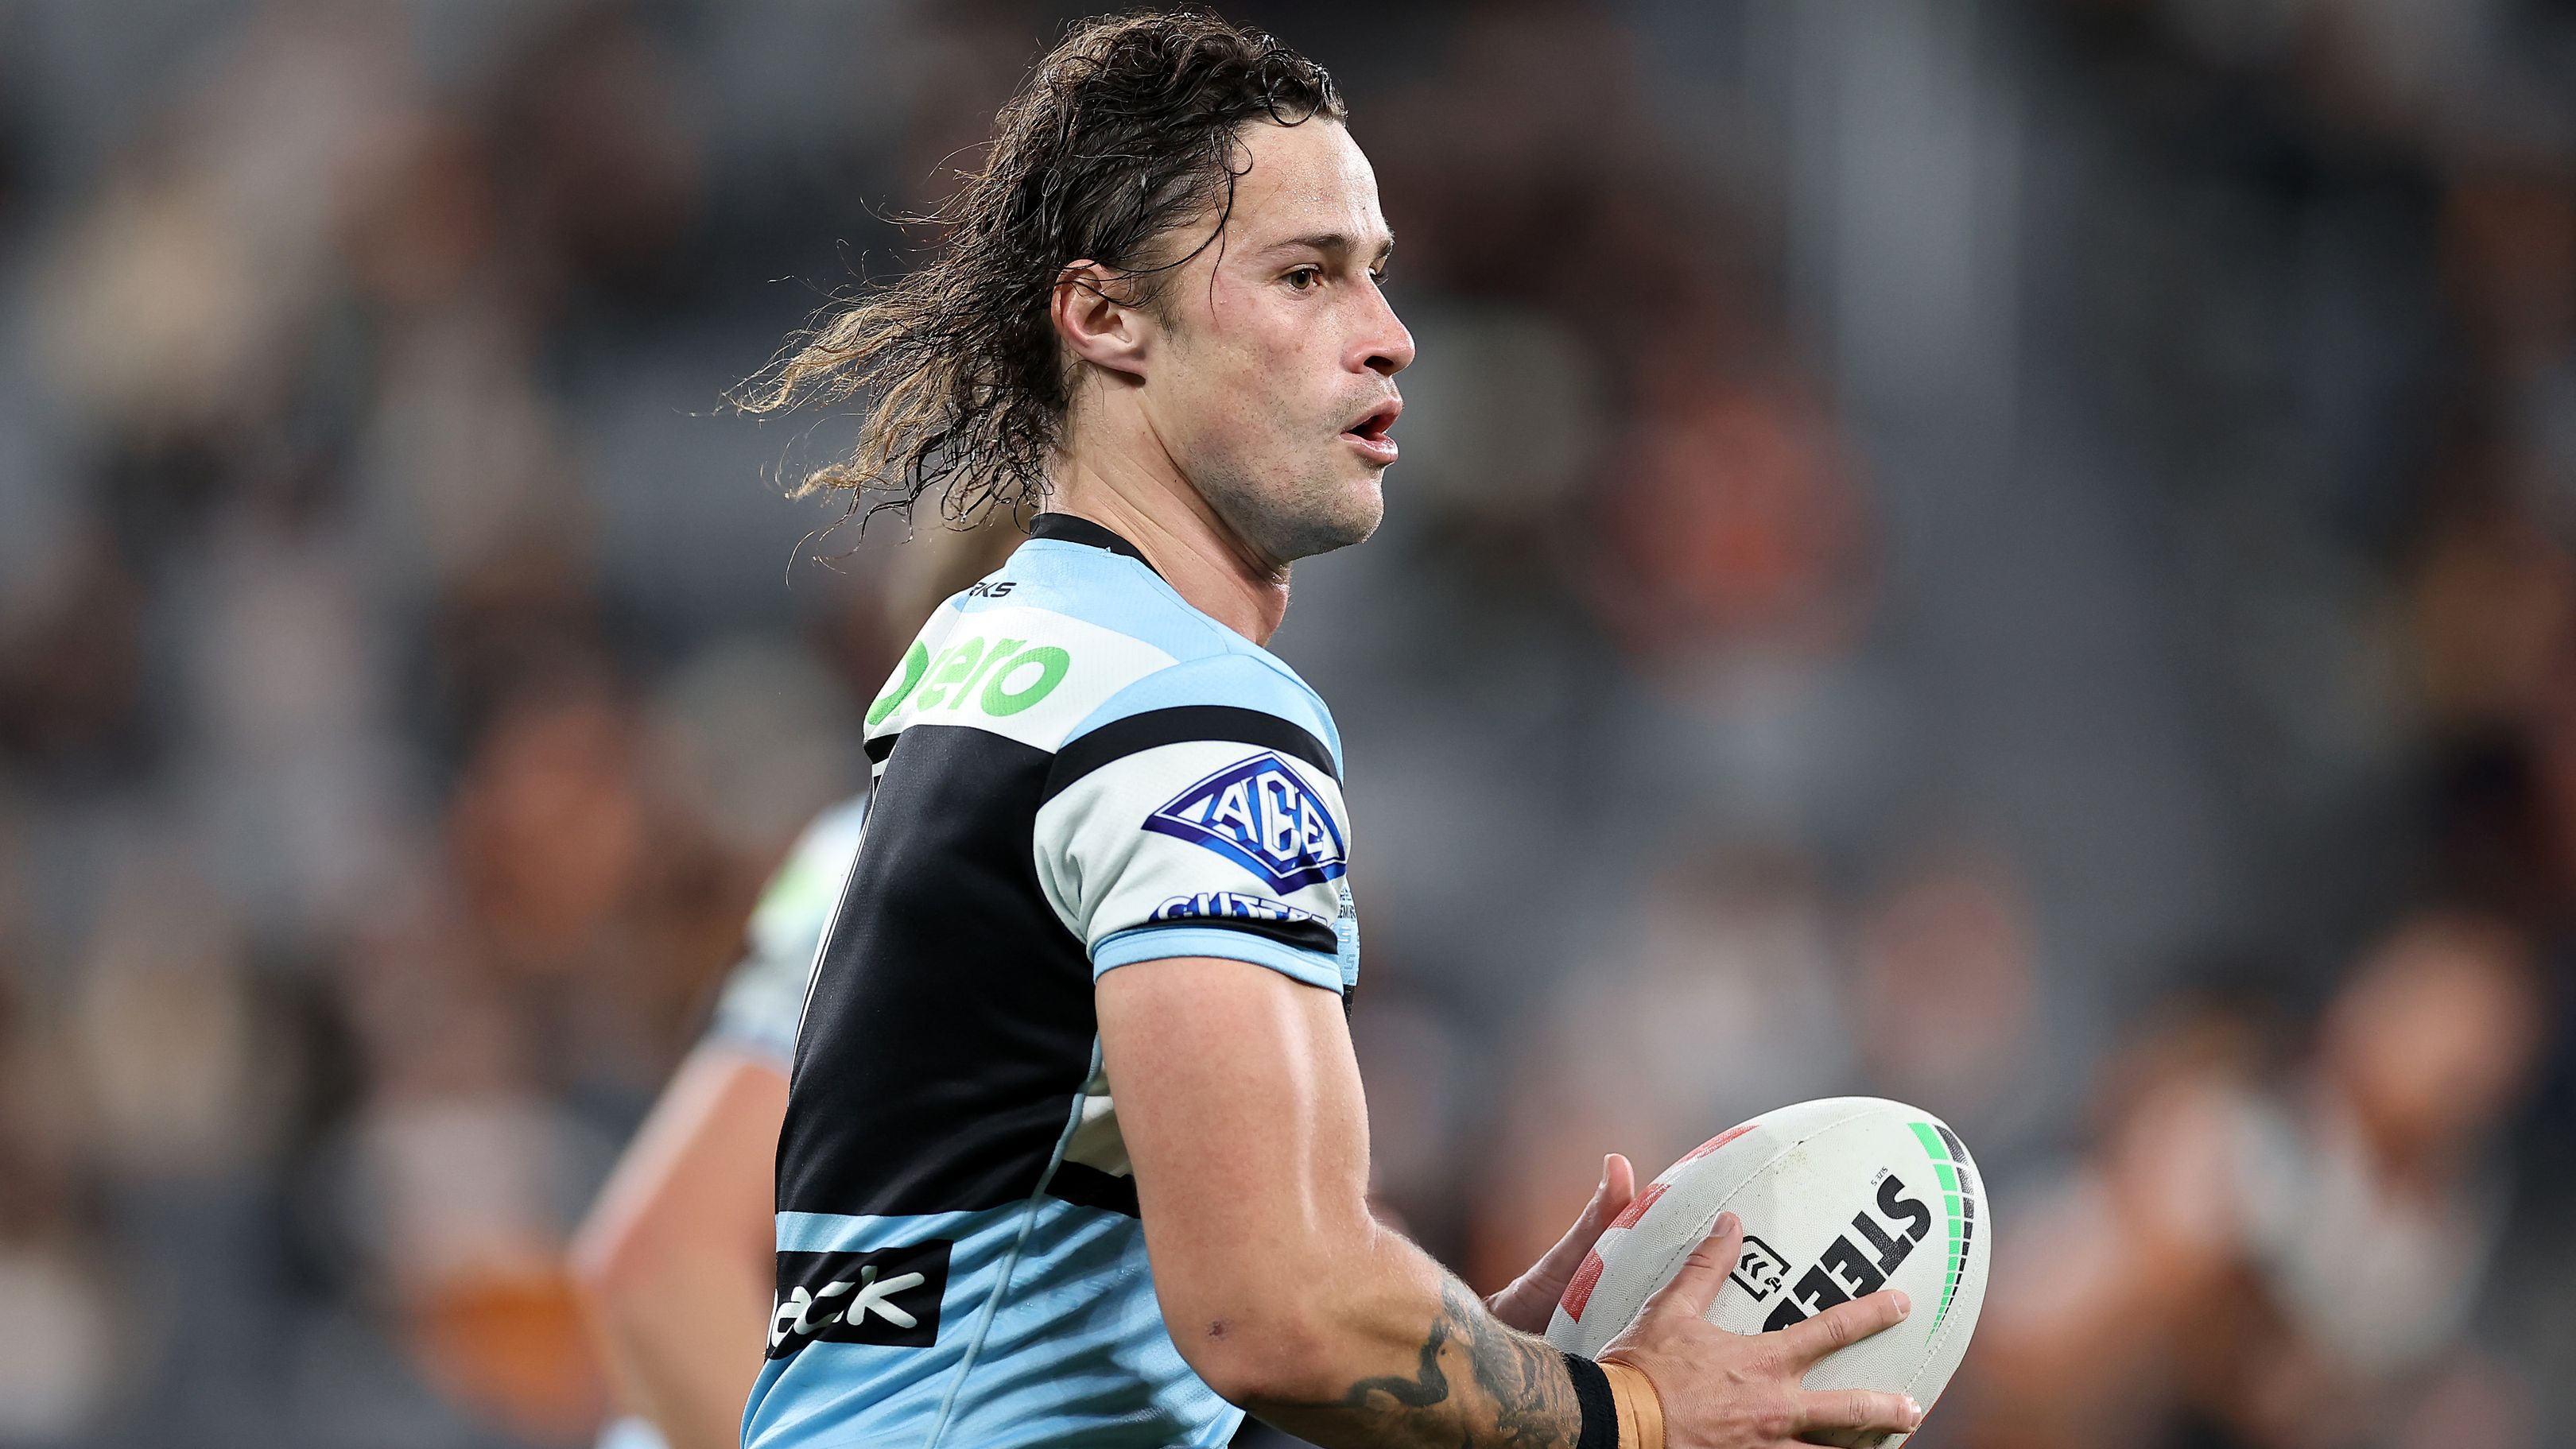 SYDNEY, AUSTRALIA - JULY 06:  Nicholas Hynes of the Sharks runs the ball during the round 19 NRL match between Wests Tigers and Cronulla Sharks at CommBank Stadium on July 06, 2023 in Sydney, Australia. (Photo by Cameron Spencer/Getty Images)